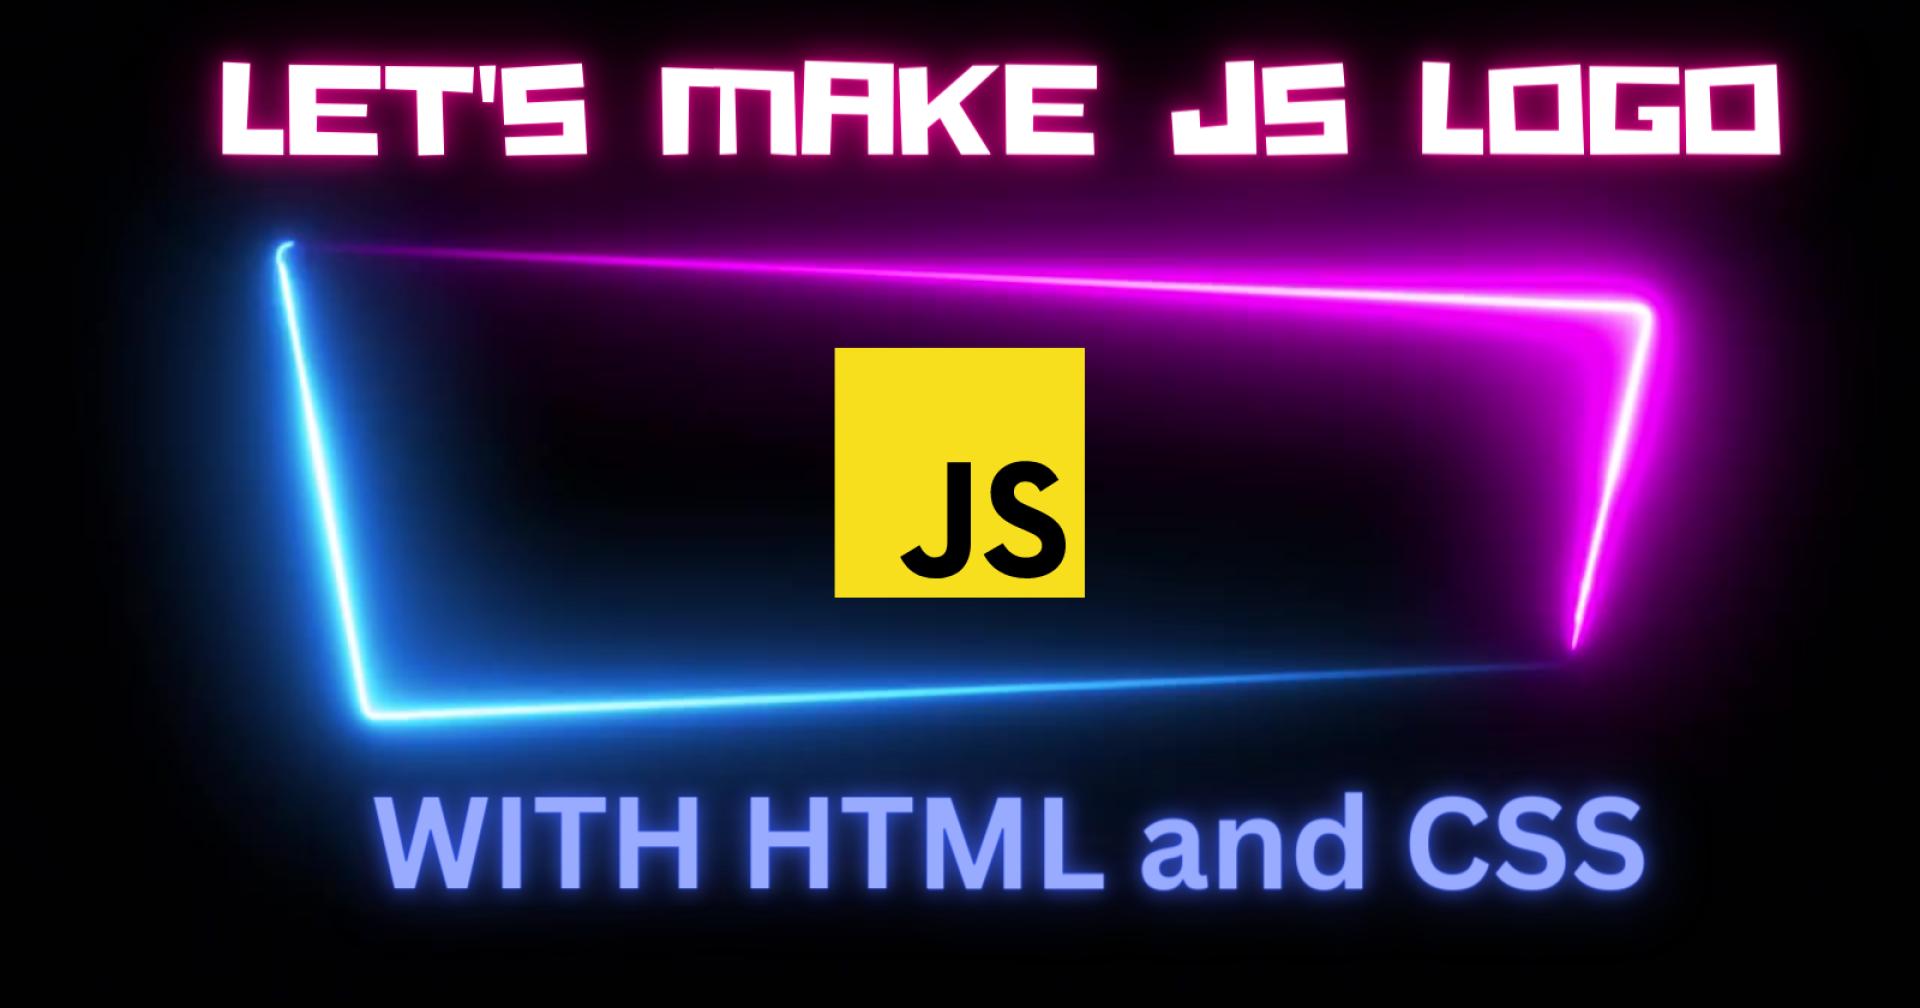 Let's make JavaScript logo with HTML and CSS! 💛